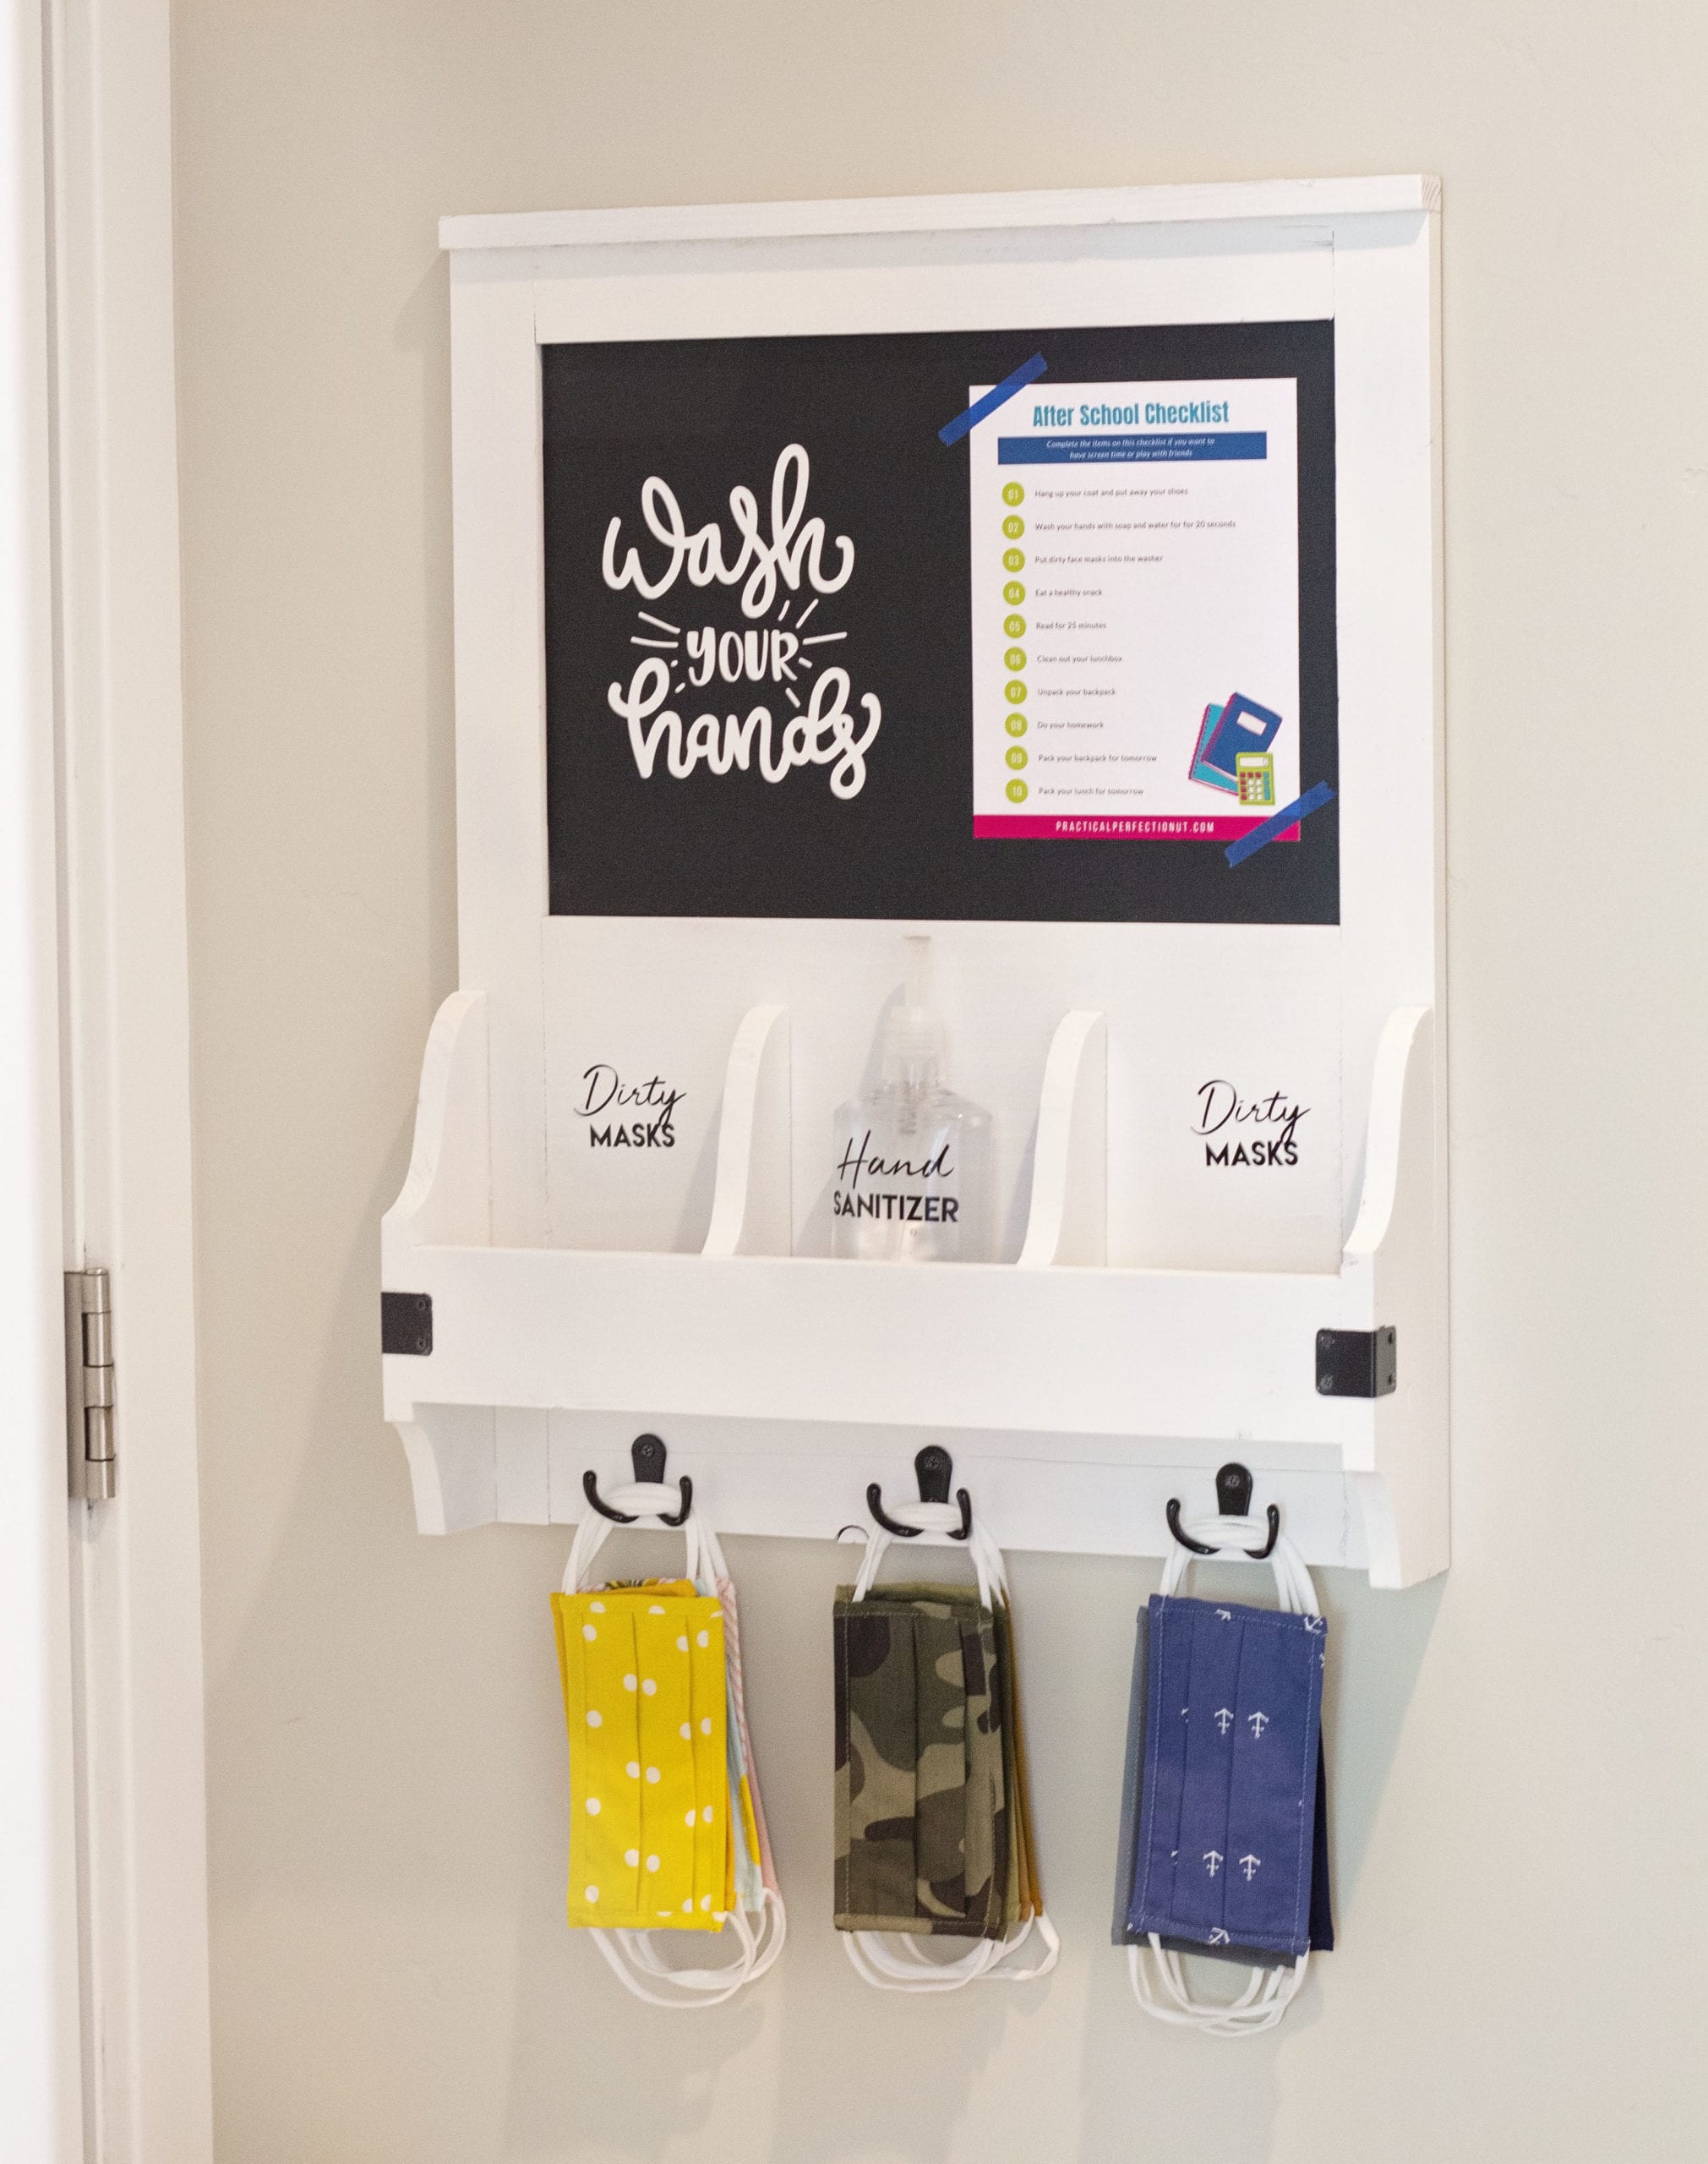 How To Create A Mask Storage System to Keep Your Family Healthy